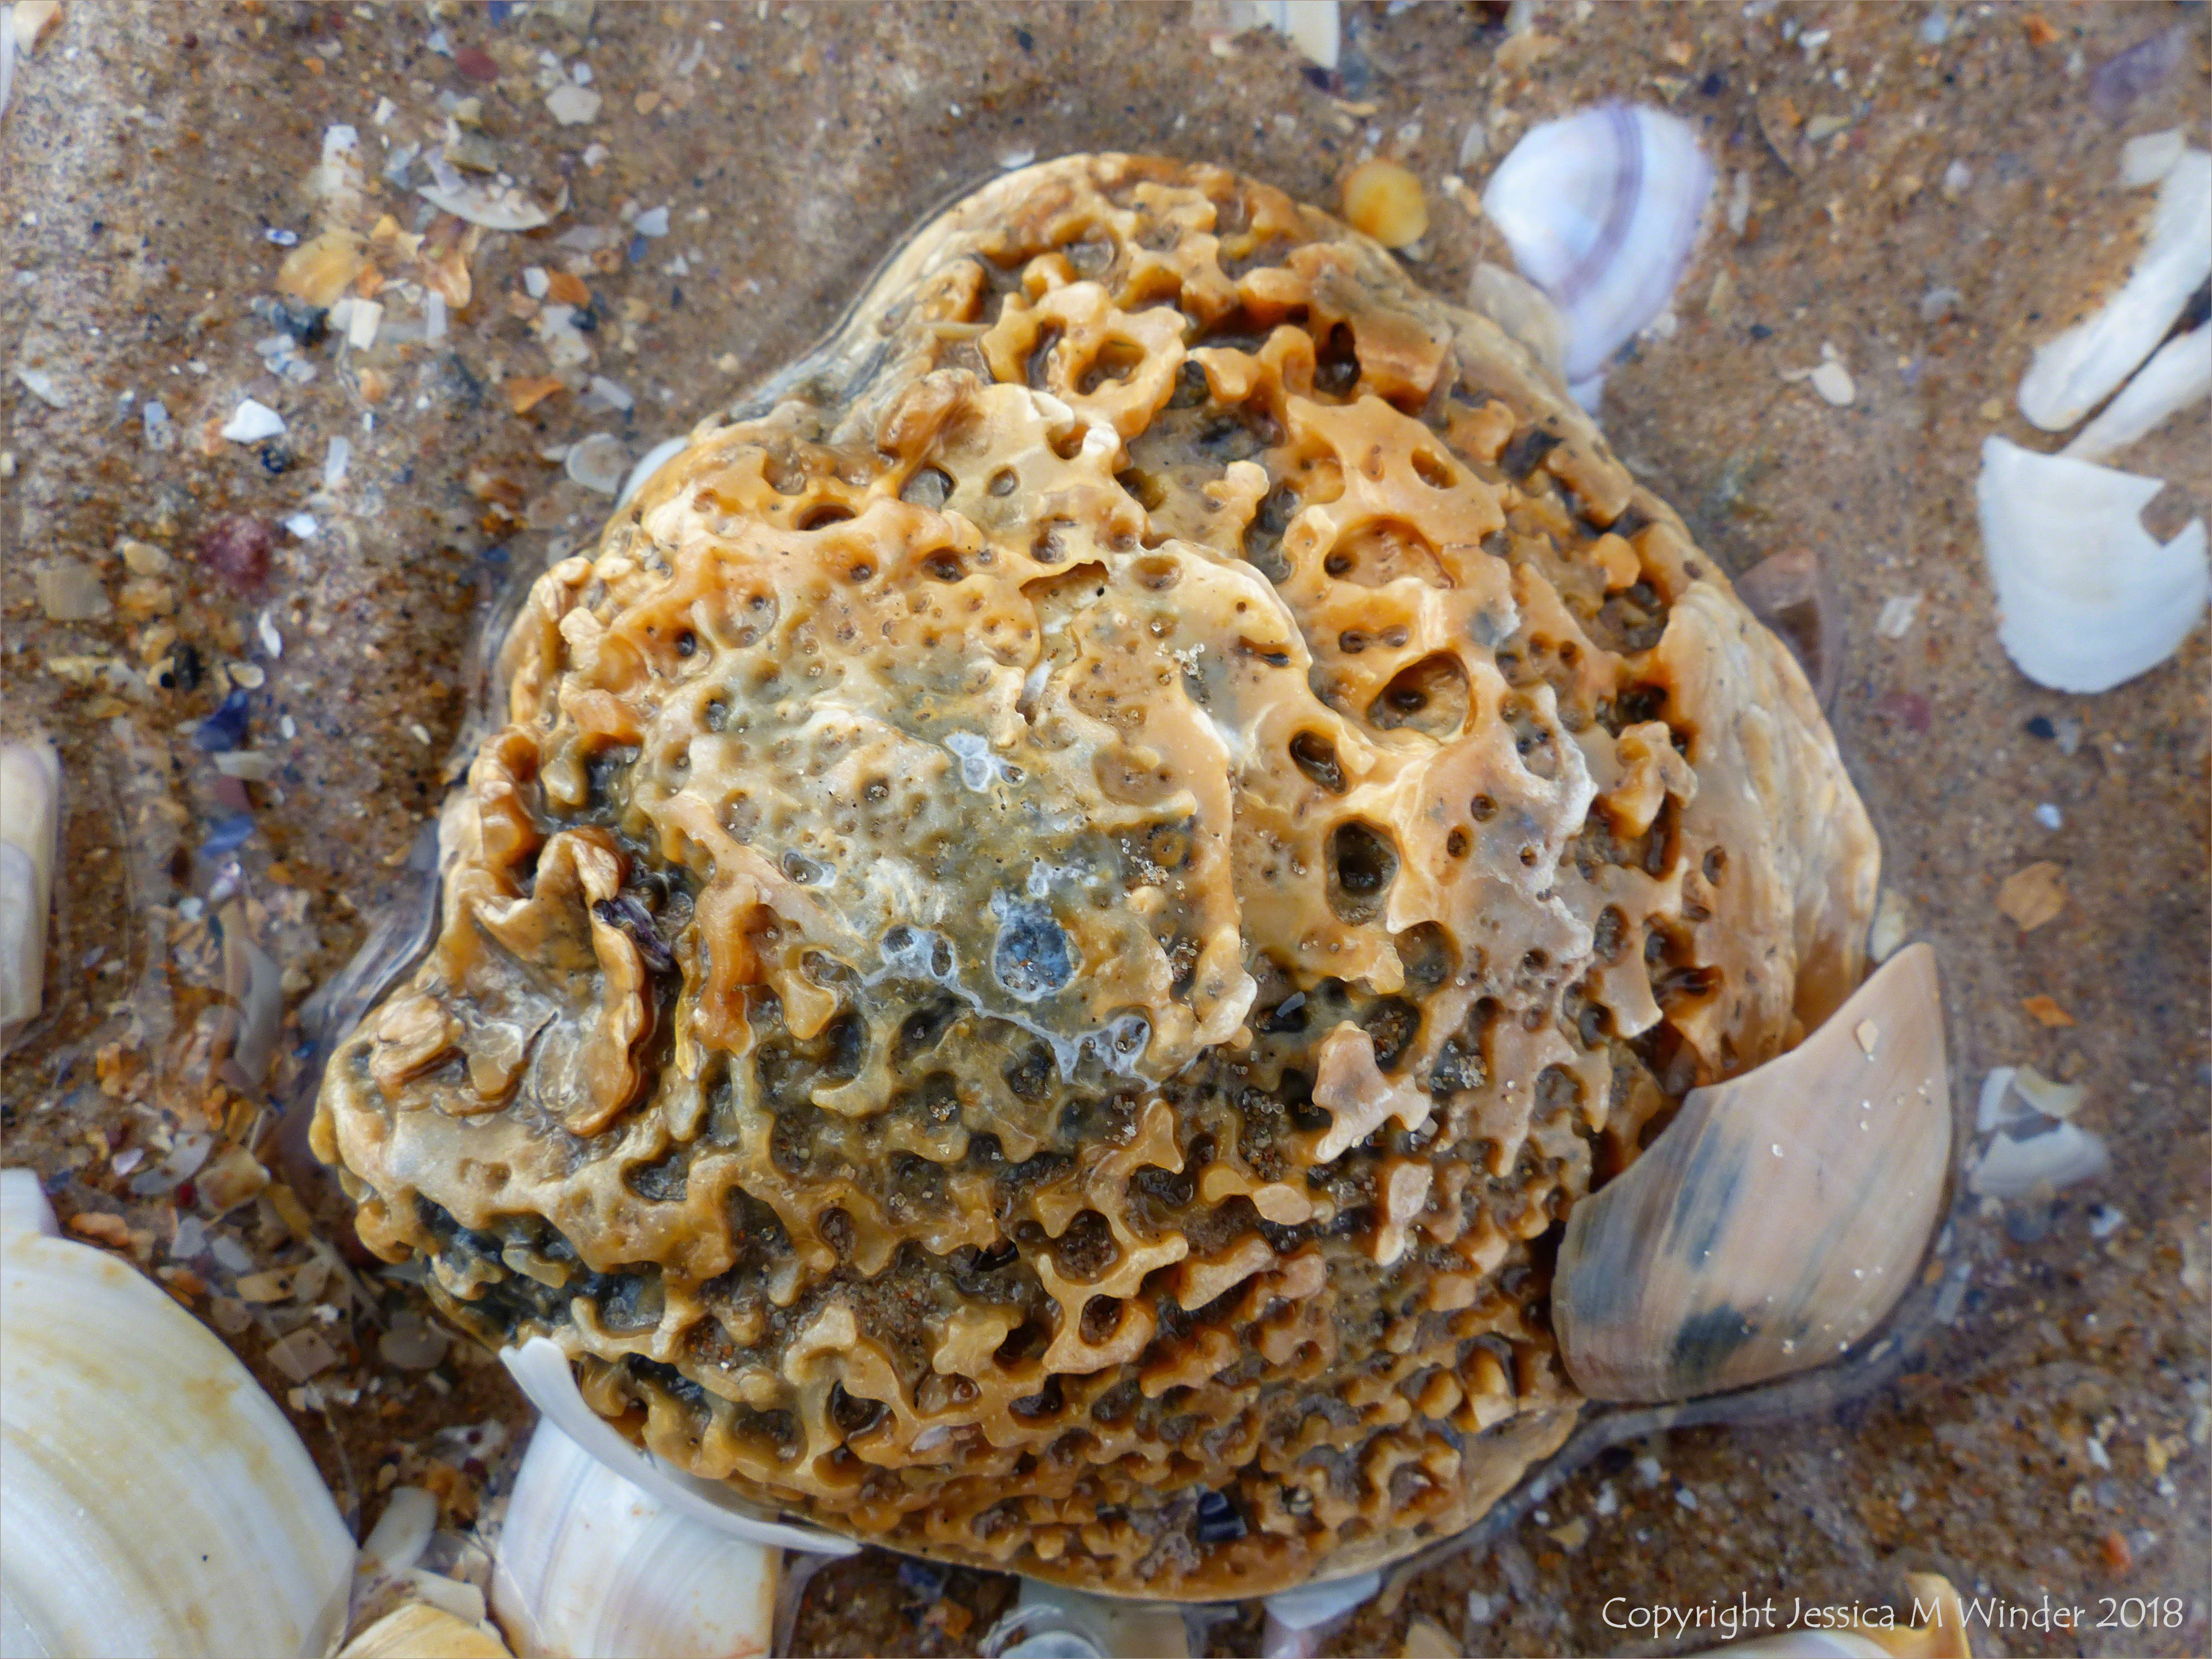 Old oyster shell on the beach with other common British seashells - oyster shell variations